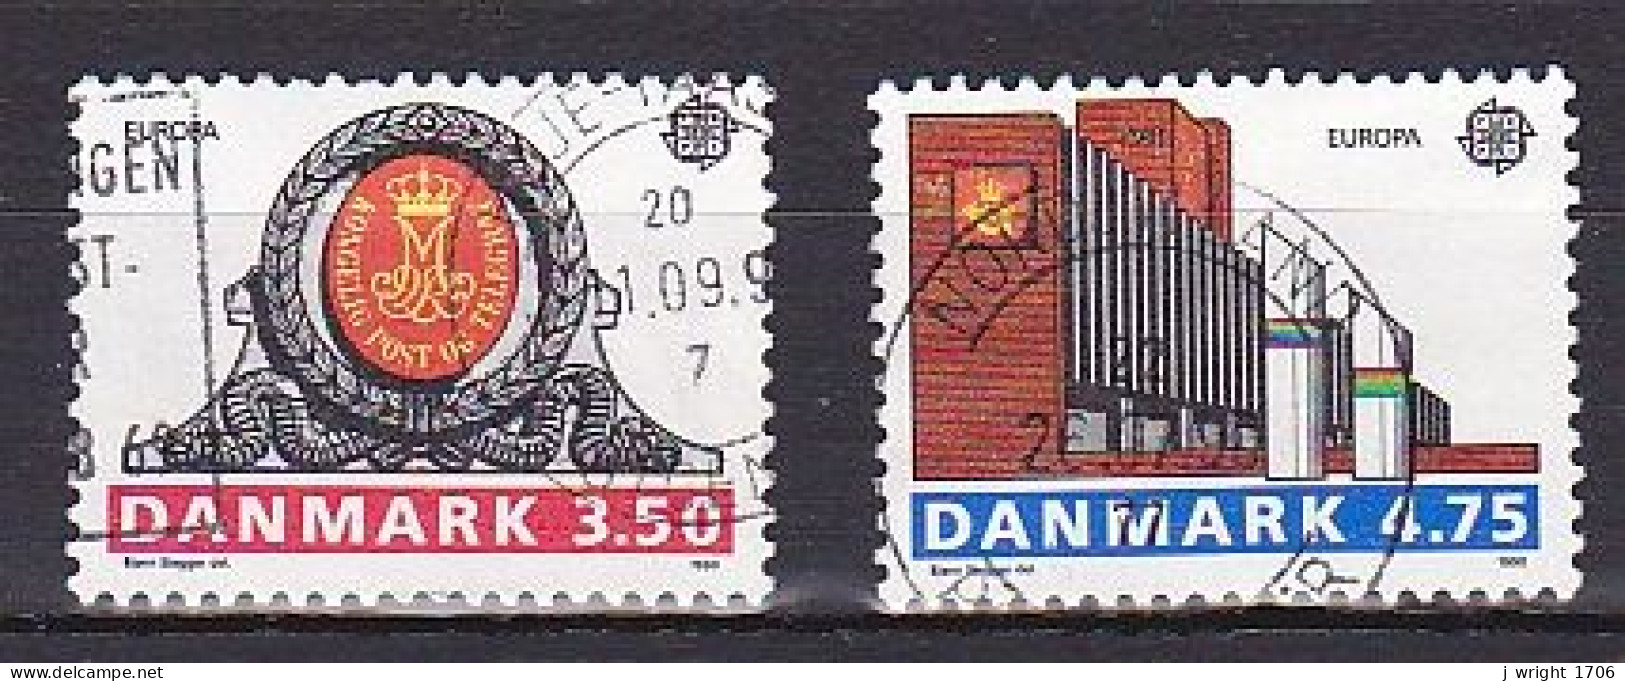 Denmark, 1990, Europa CEPT, Set, USED - Used Stamps